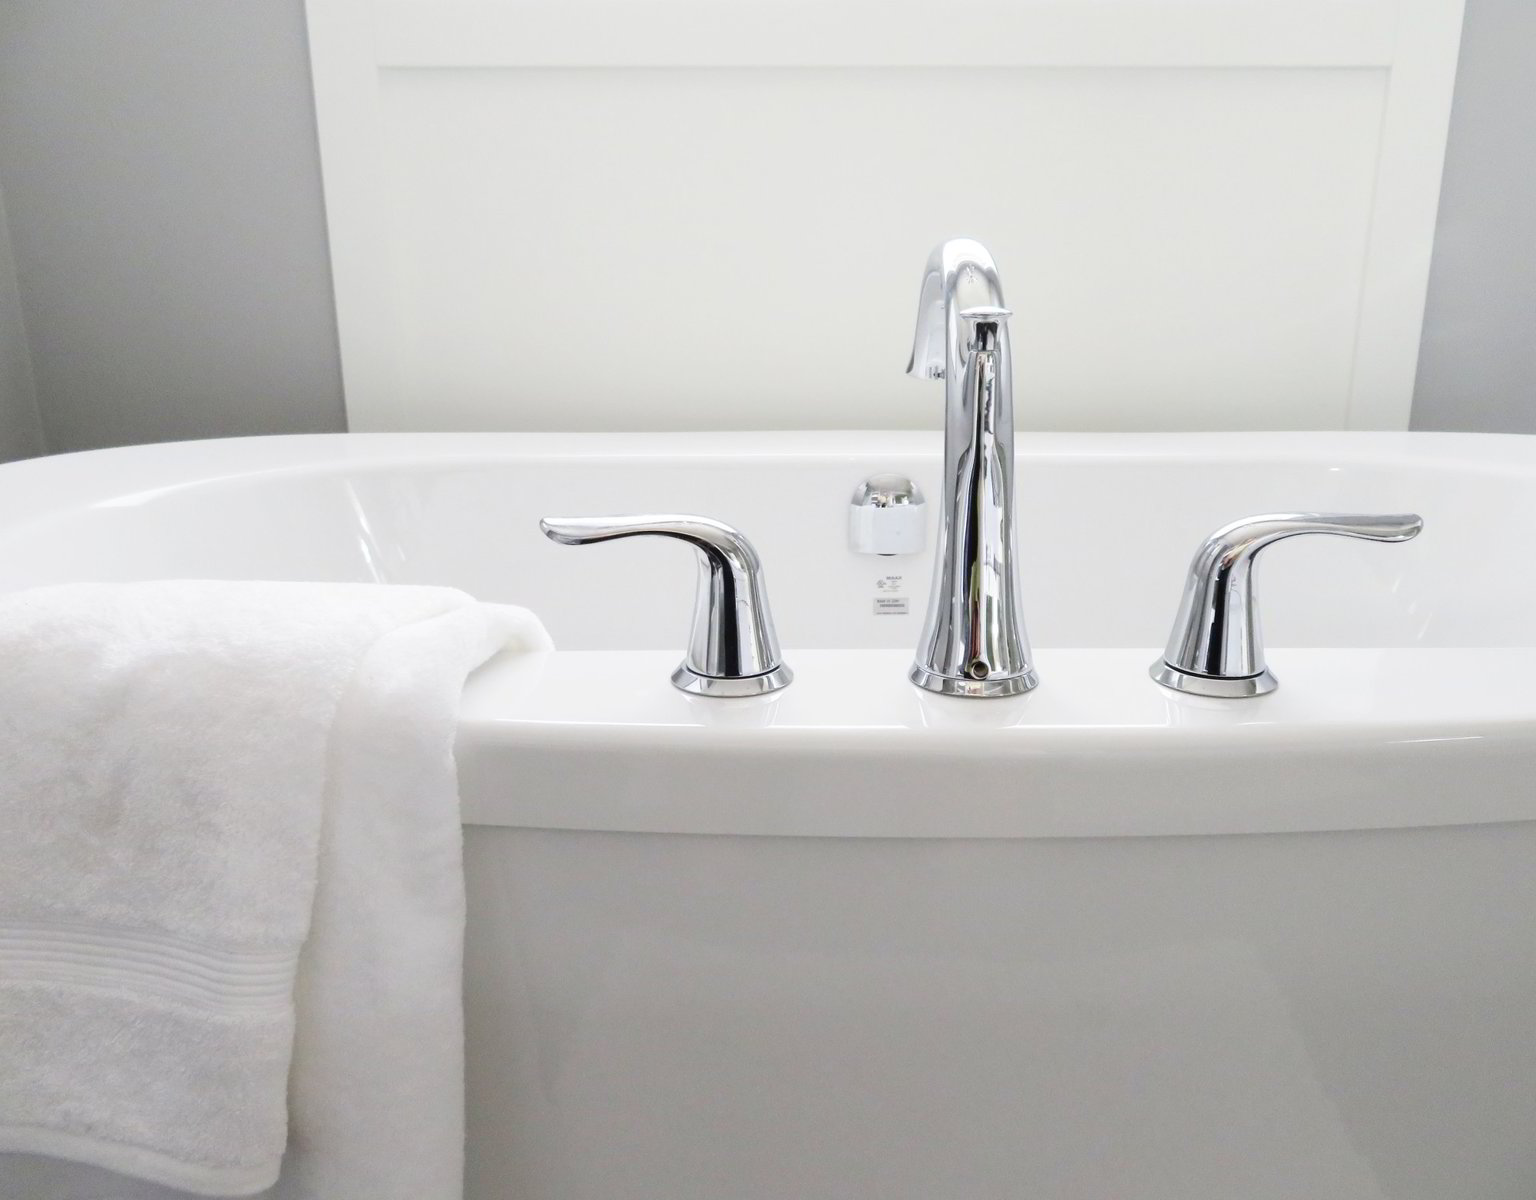 How To Fix A Leaky Bathtub Faucet, How To Stop A Bathtub Faucet From Leaking